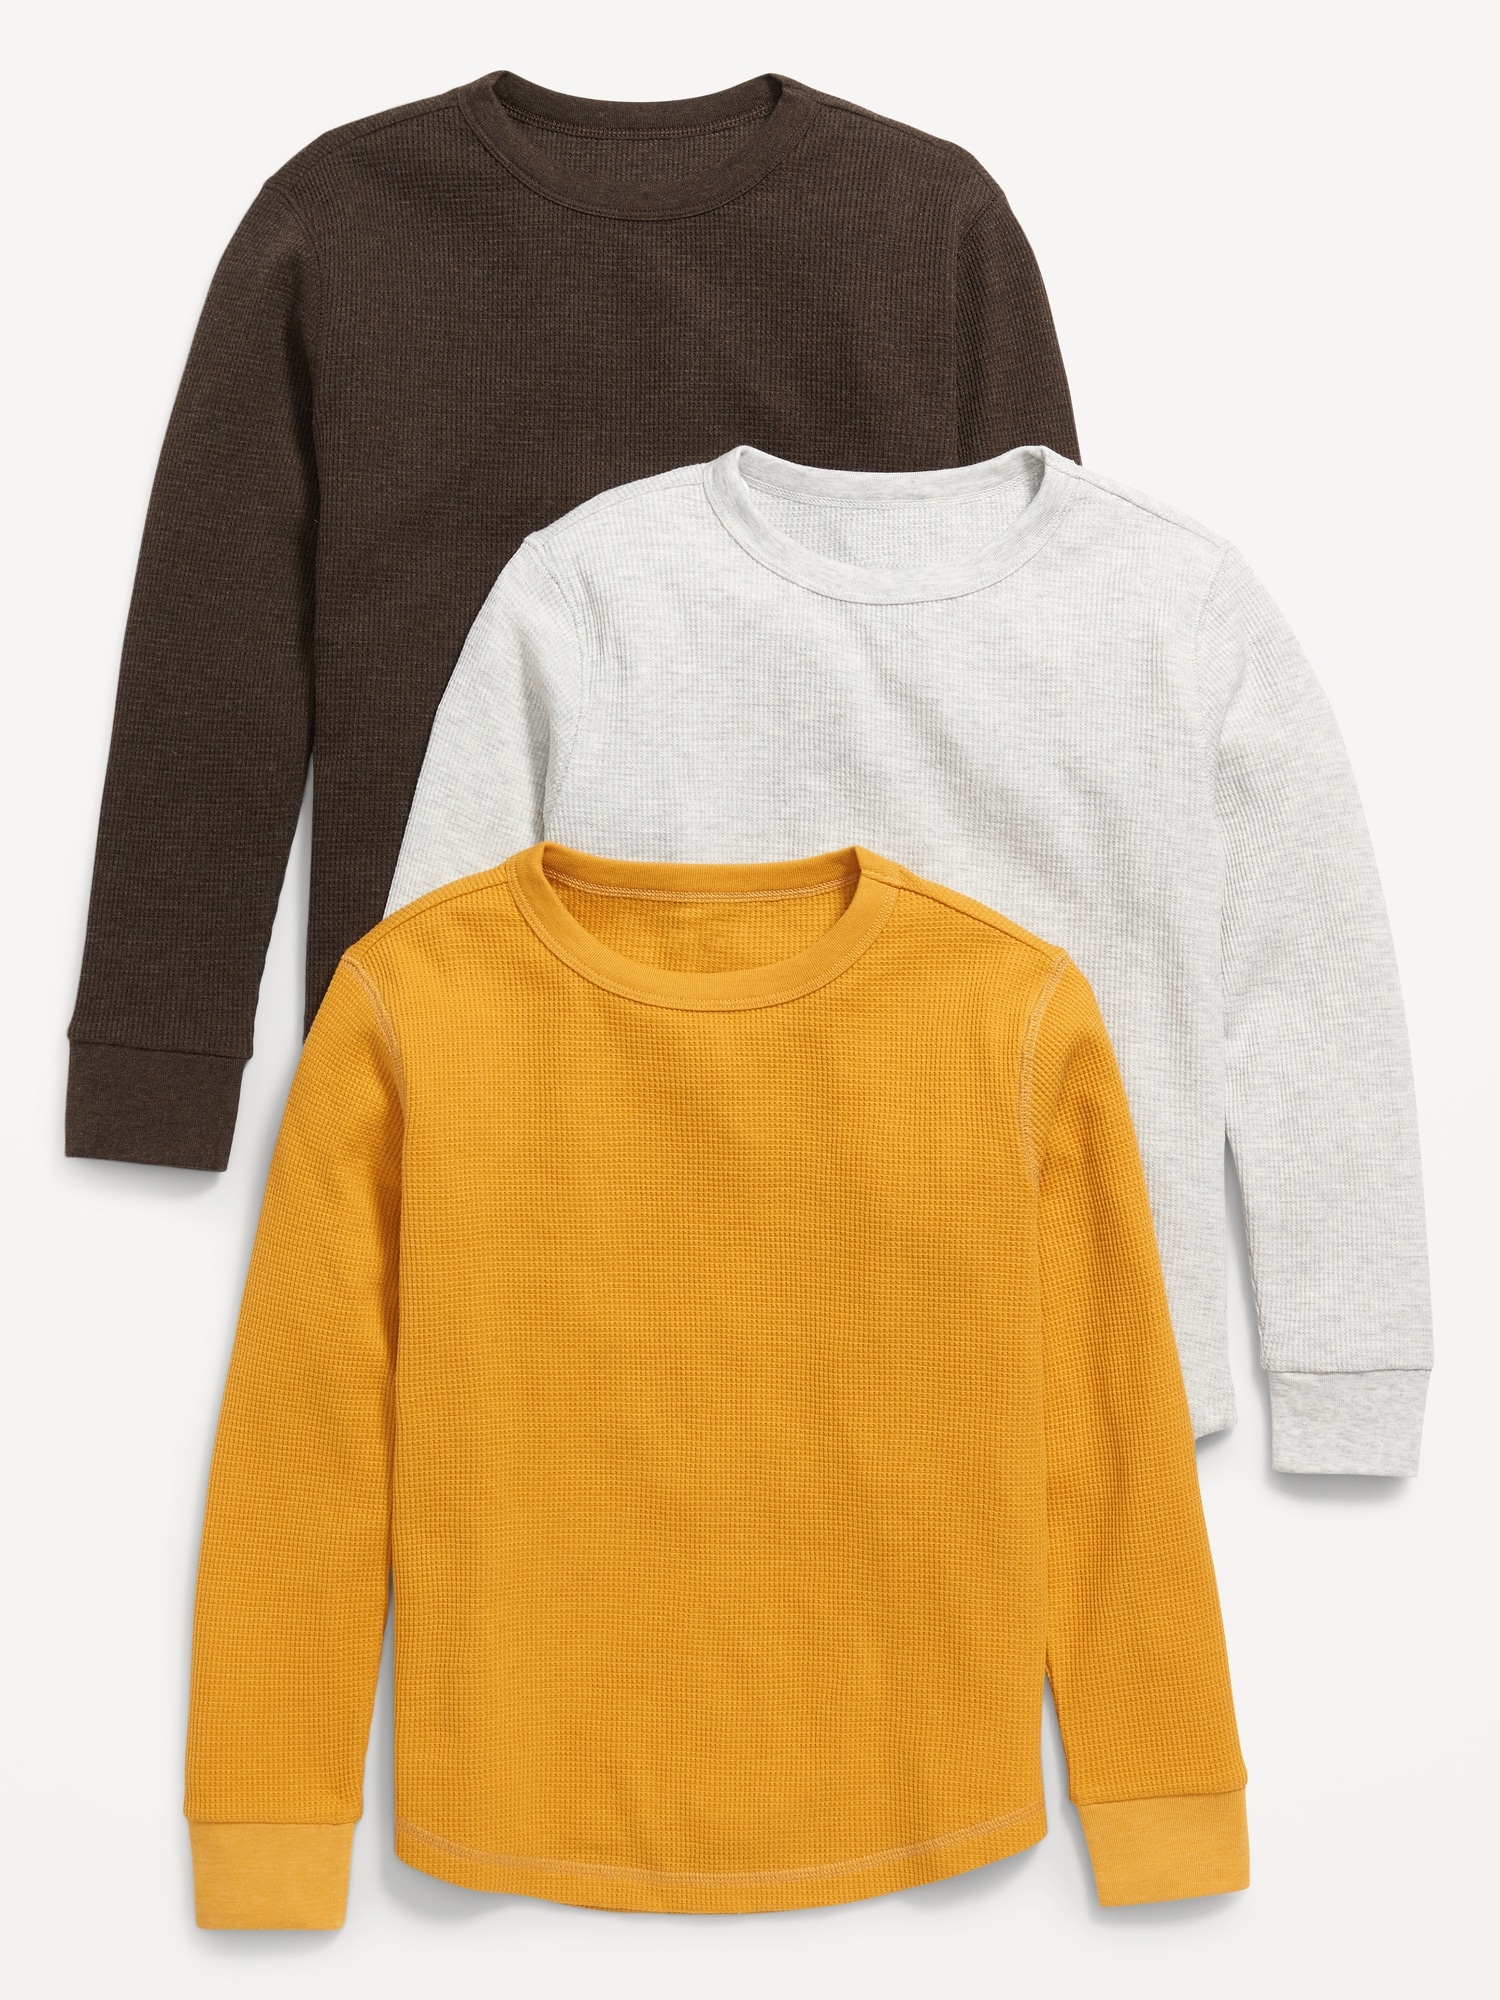 Thermal-Knit Long-Sleeve T-Shirt 3-Pack for Boys | Old Navy